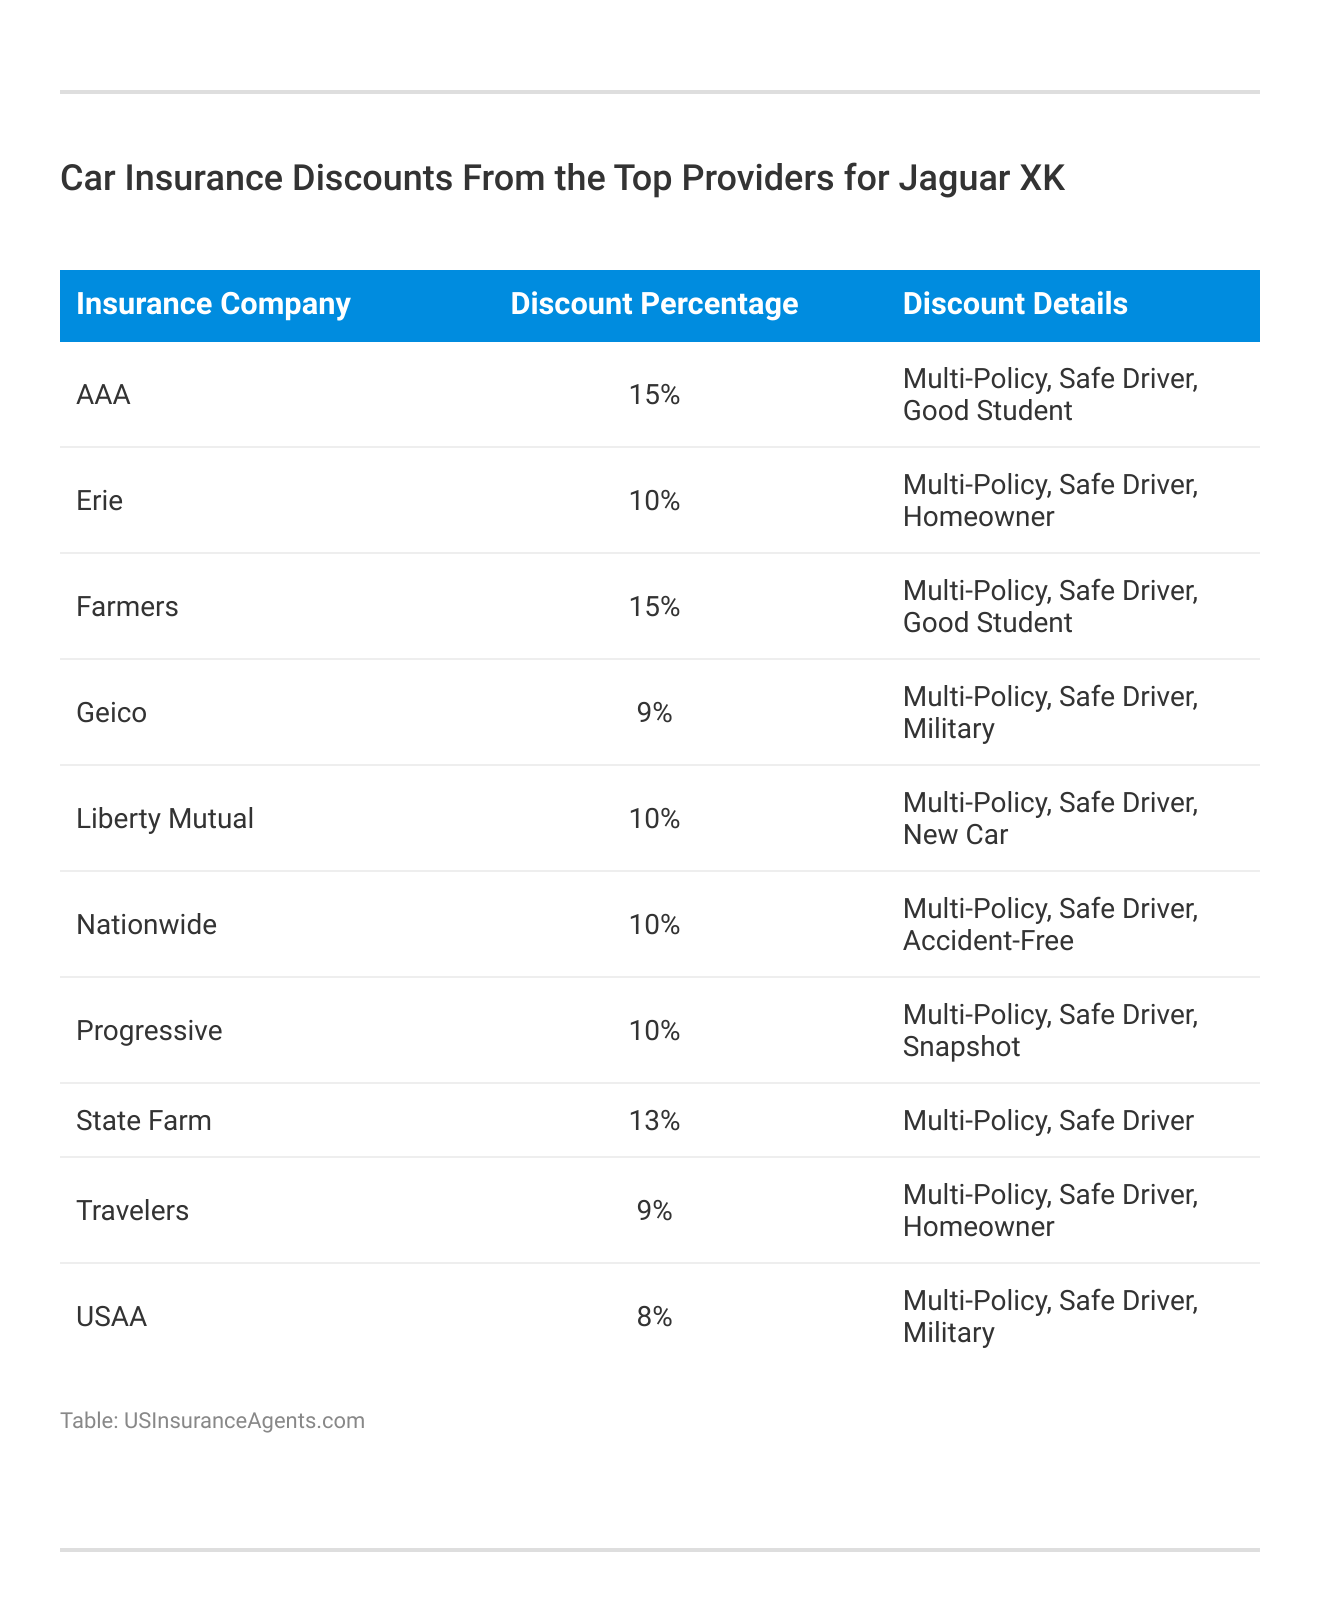 <h3>Car Insurance Discounts From the Top Providers for Jaguar XK</h3>